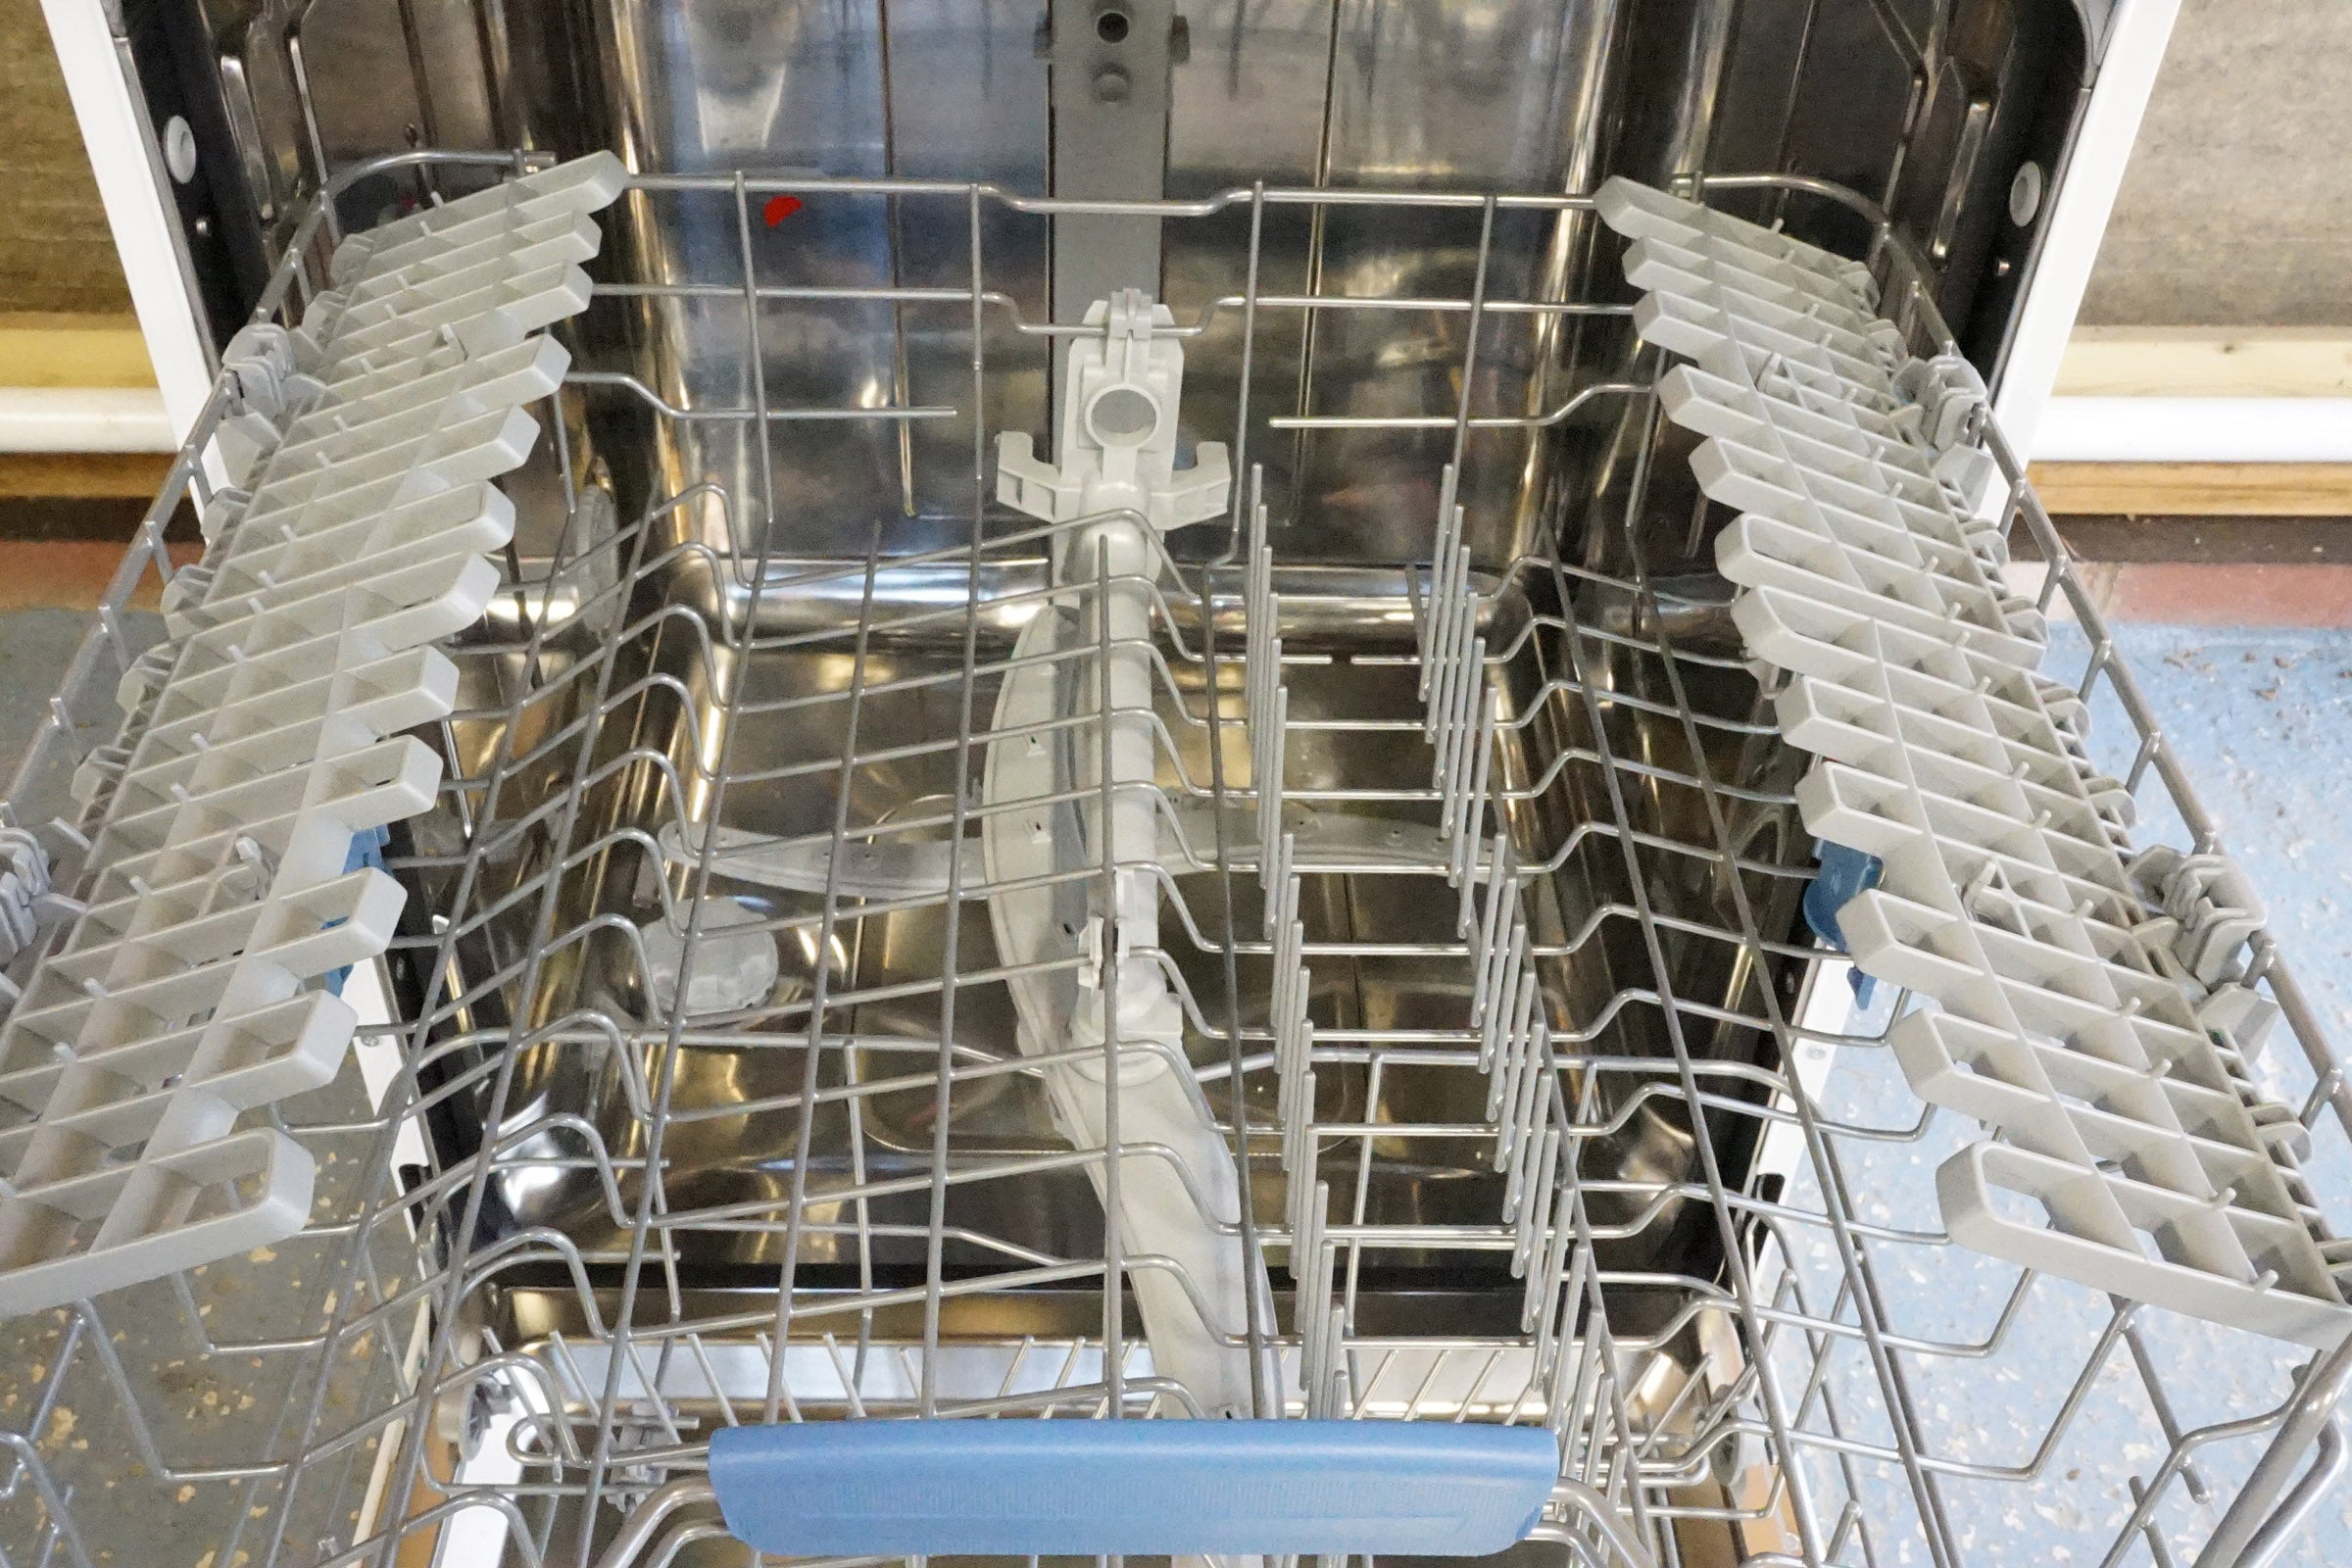 Interior view of an empty Indesit dishwasher model DFP 27T96 Z UK.